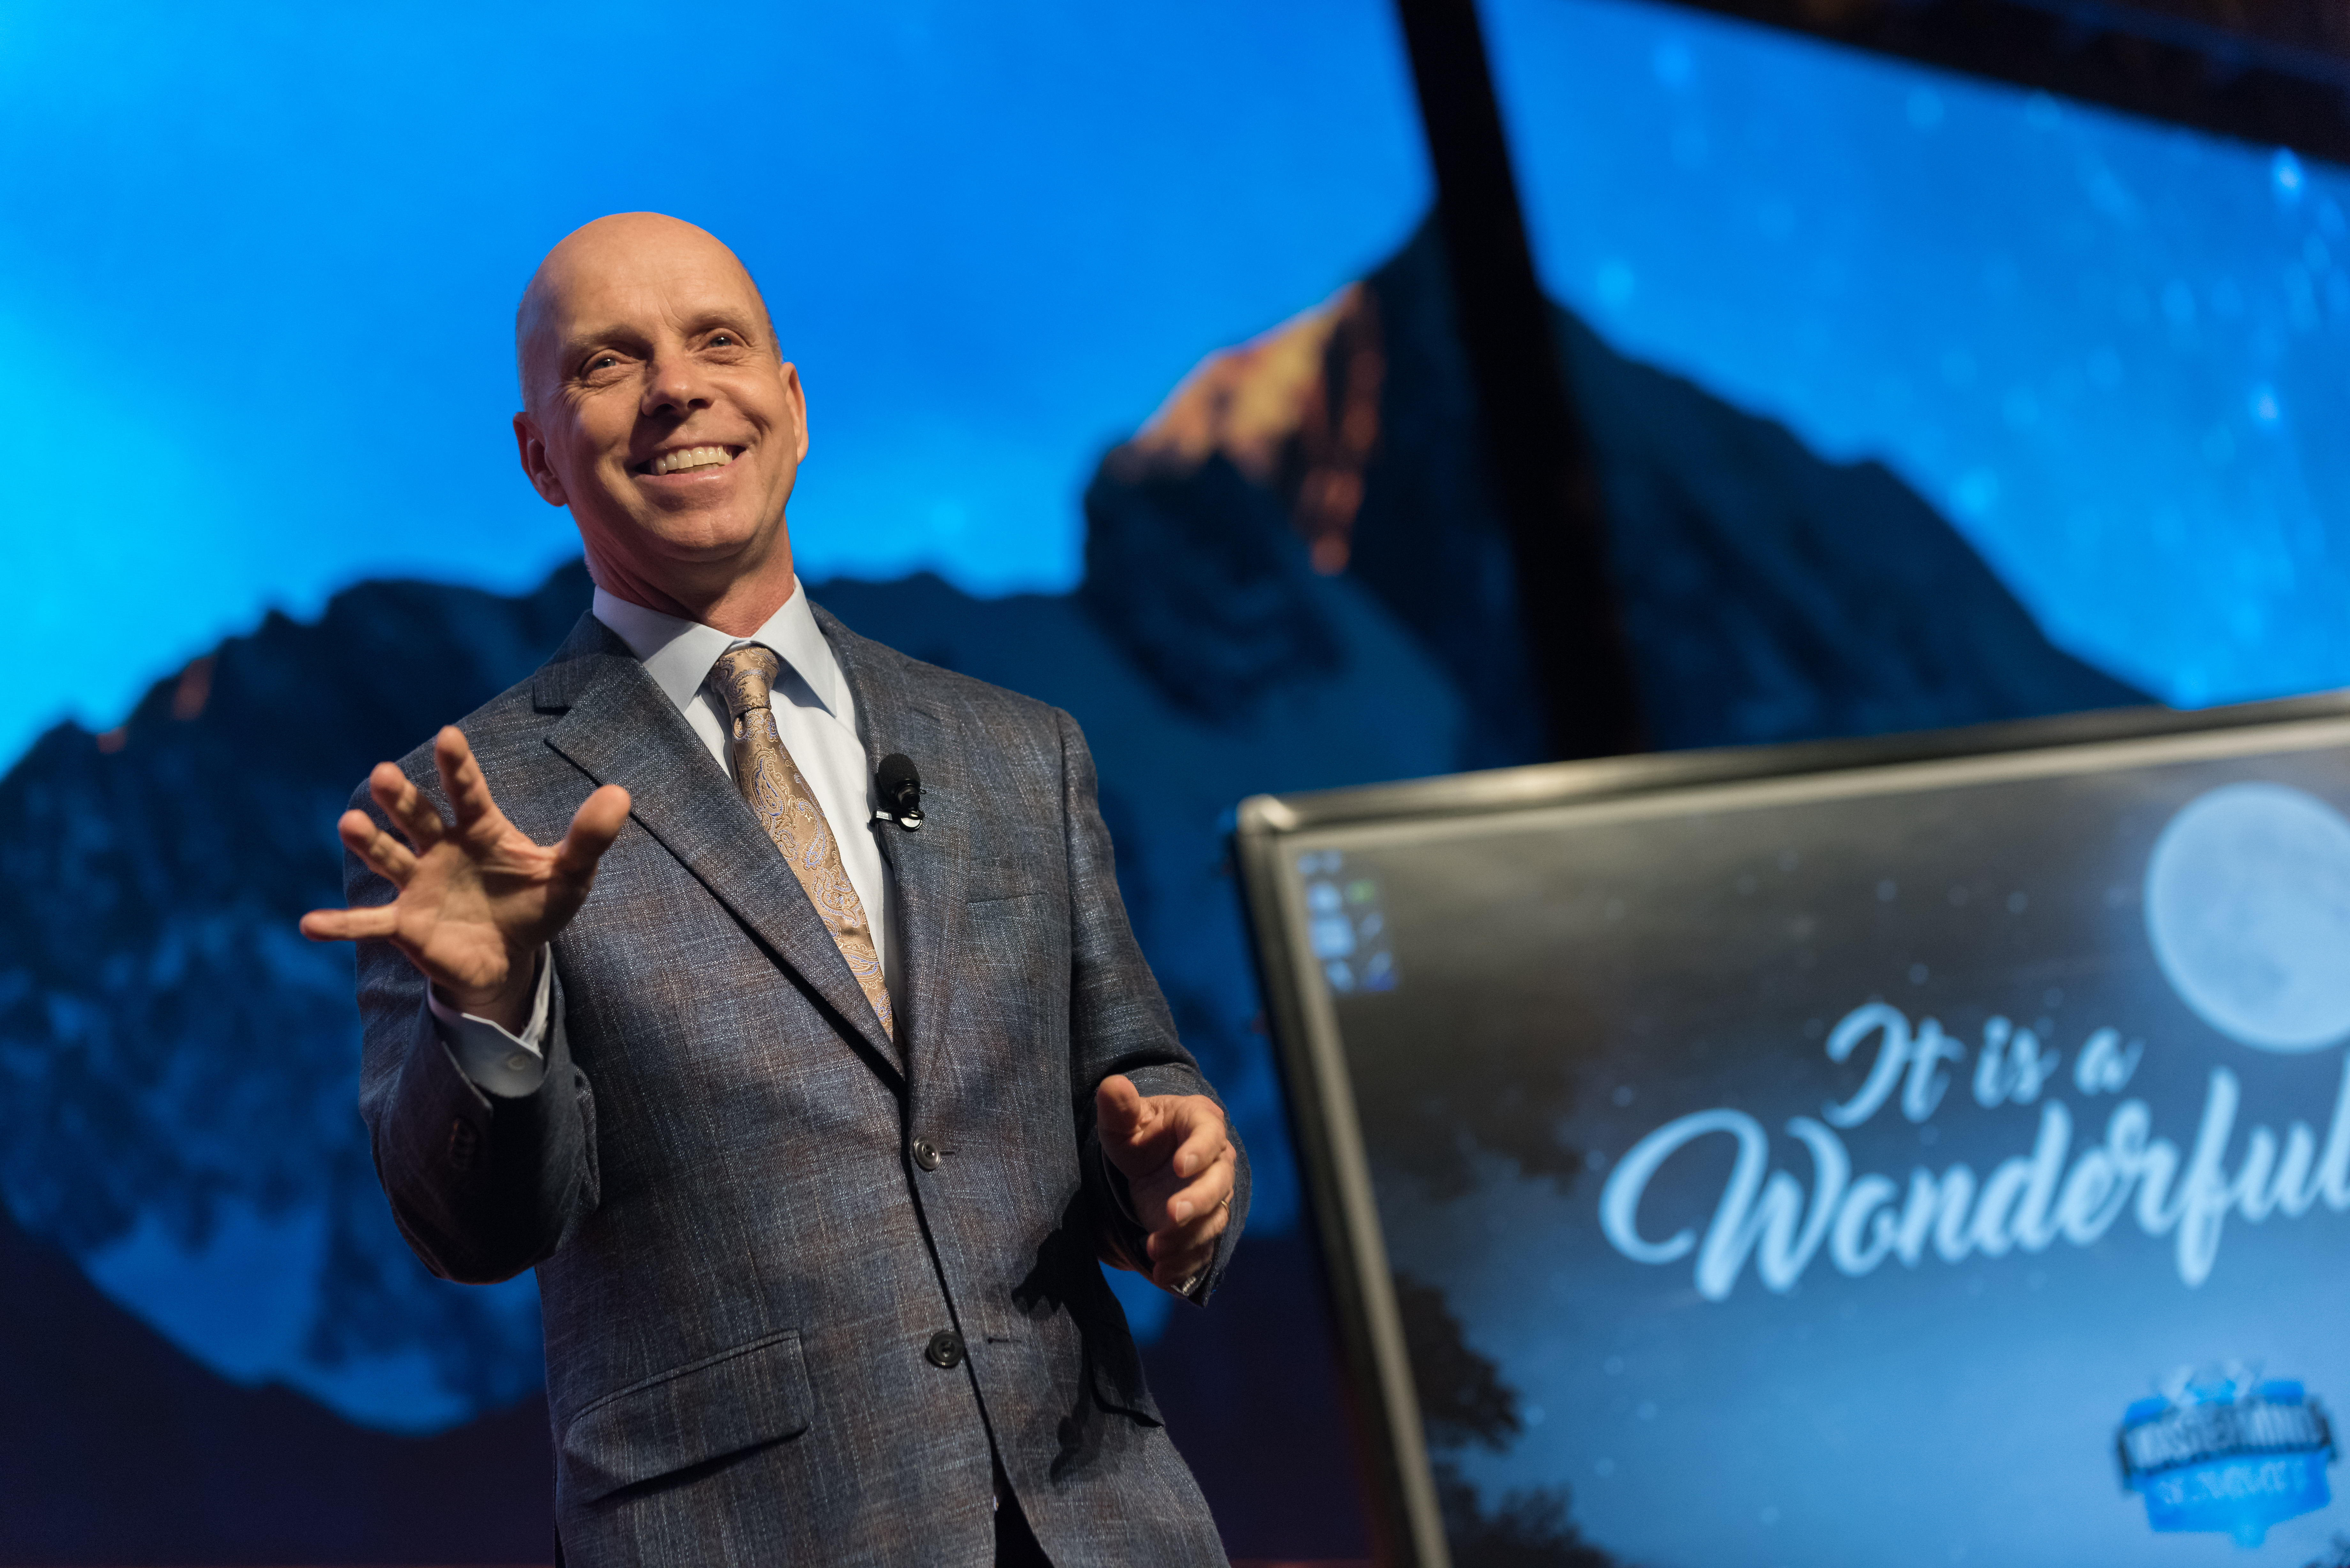 Olympic champion, Scott Hamilton as featured on Jesus Calling podcast